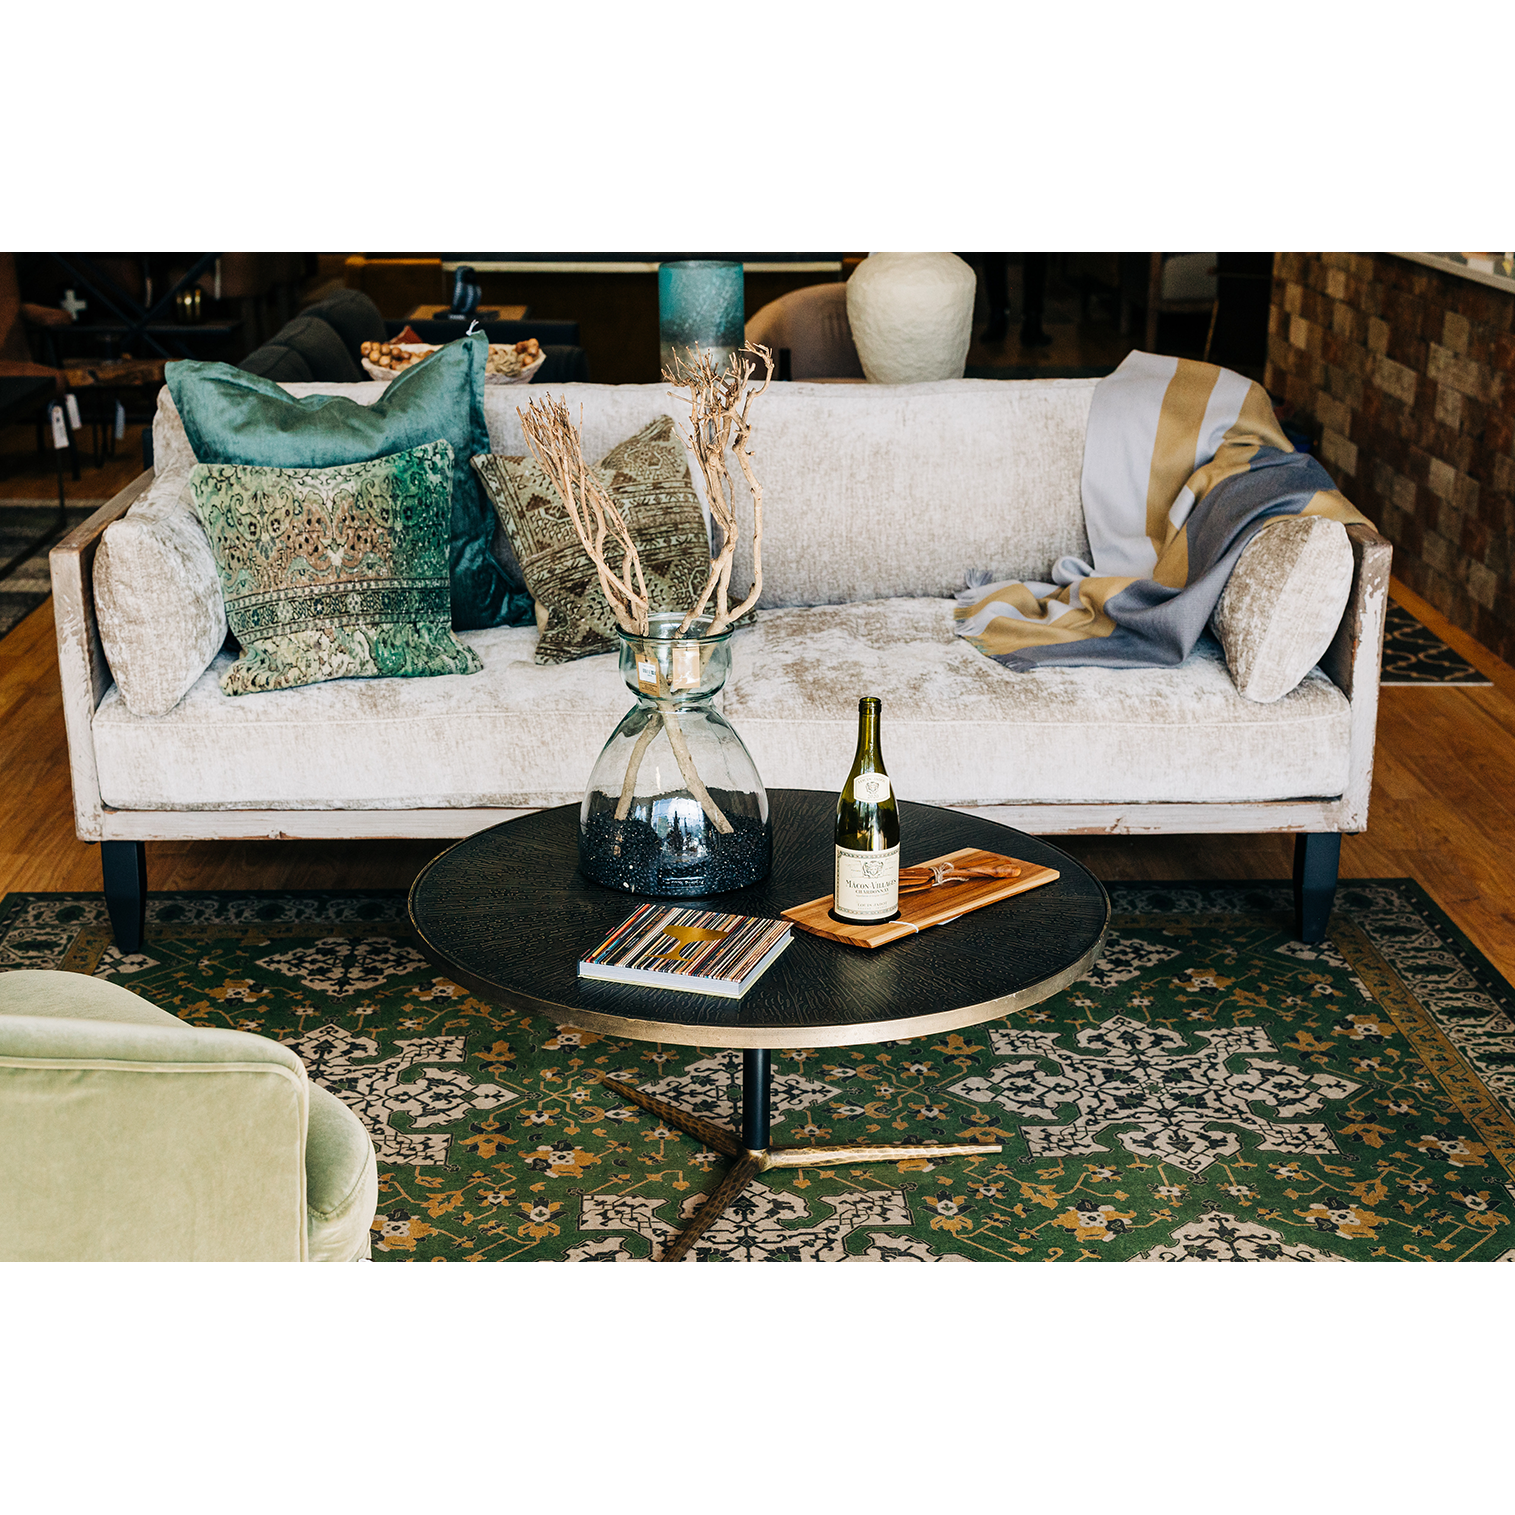 A cozy living room scene with a luxurious Burton Champagne Chenille Sofa adorned with decorative pillows, a round black coffee table featuring a vase with dried twigs, a book, and a wine bottle with a glass on top of a patterned green rug.